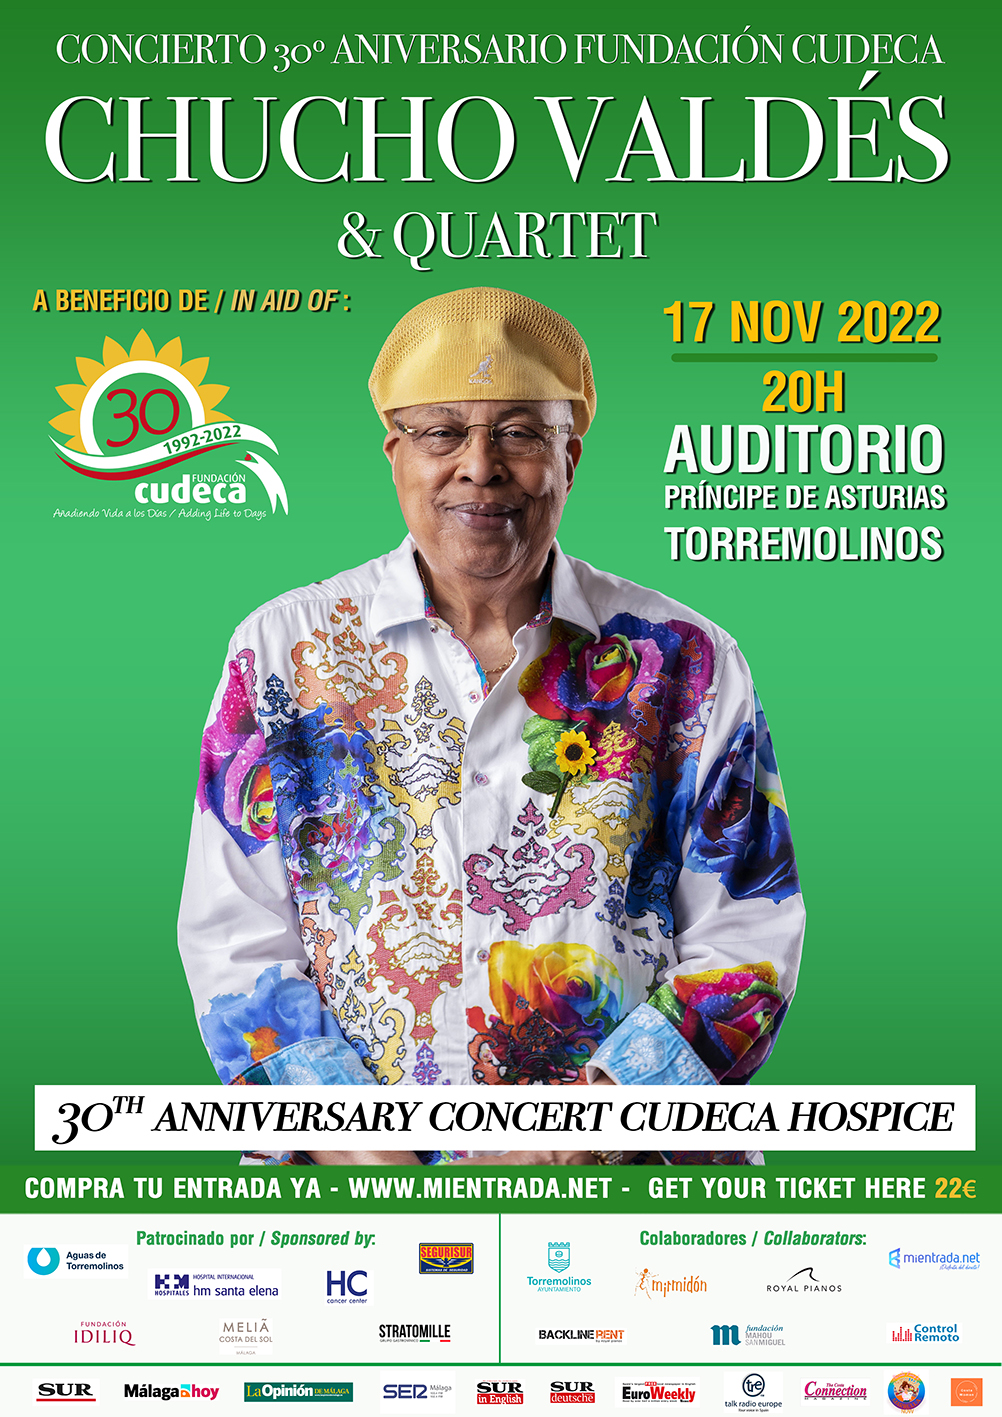 International afro-Cuban jazz pianist Chucho Valdés in Solidarity Concert for the 30th Anniversary of the Cudeca Hospice